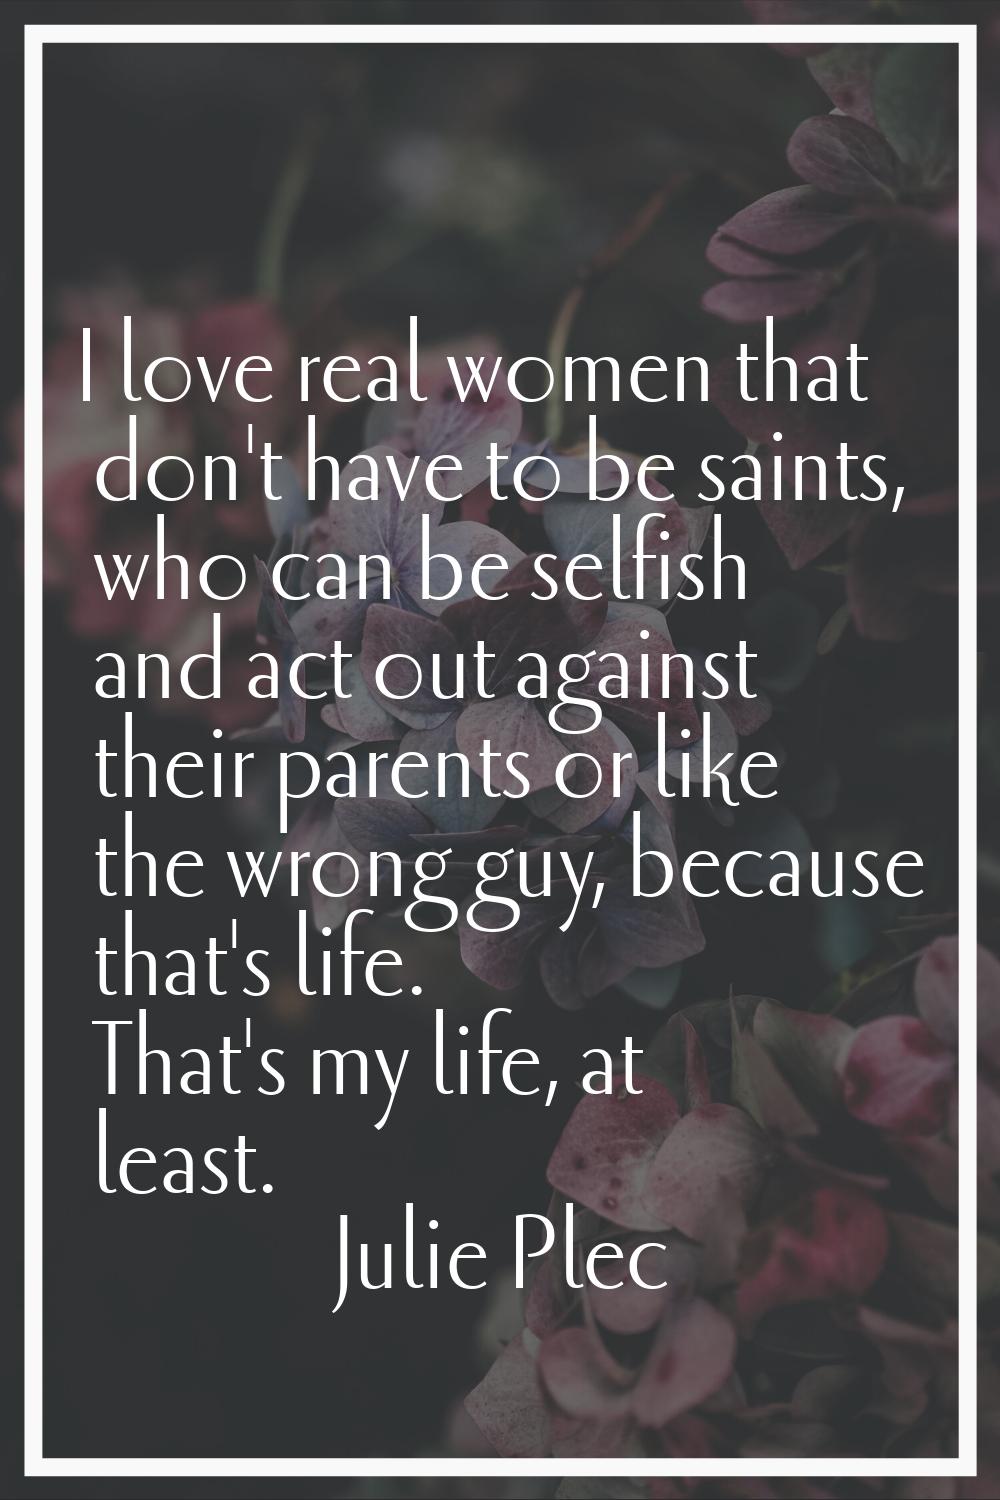 I love real women that don't have to be saints, who can be selfish and act out against their parent